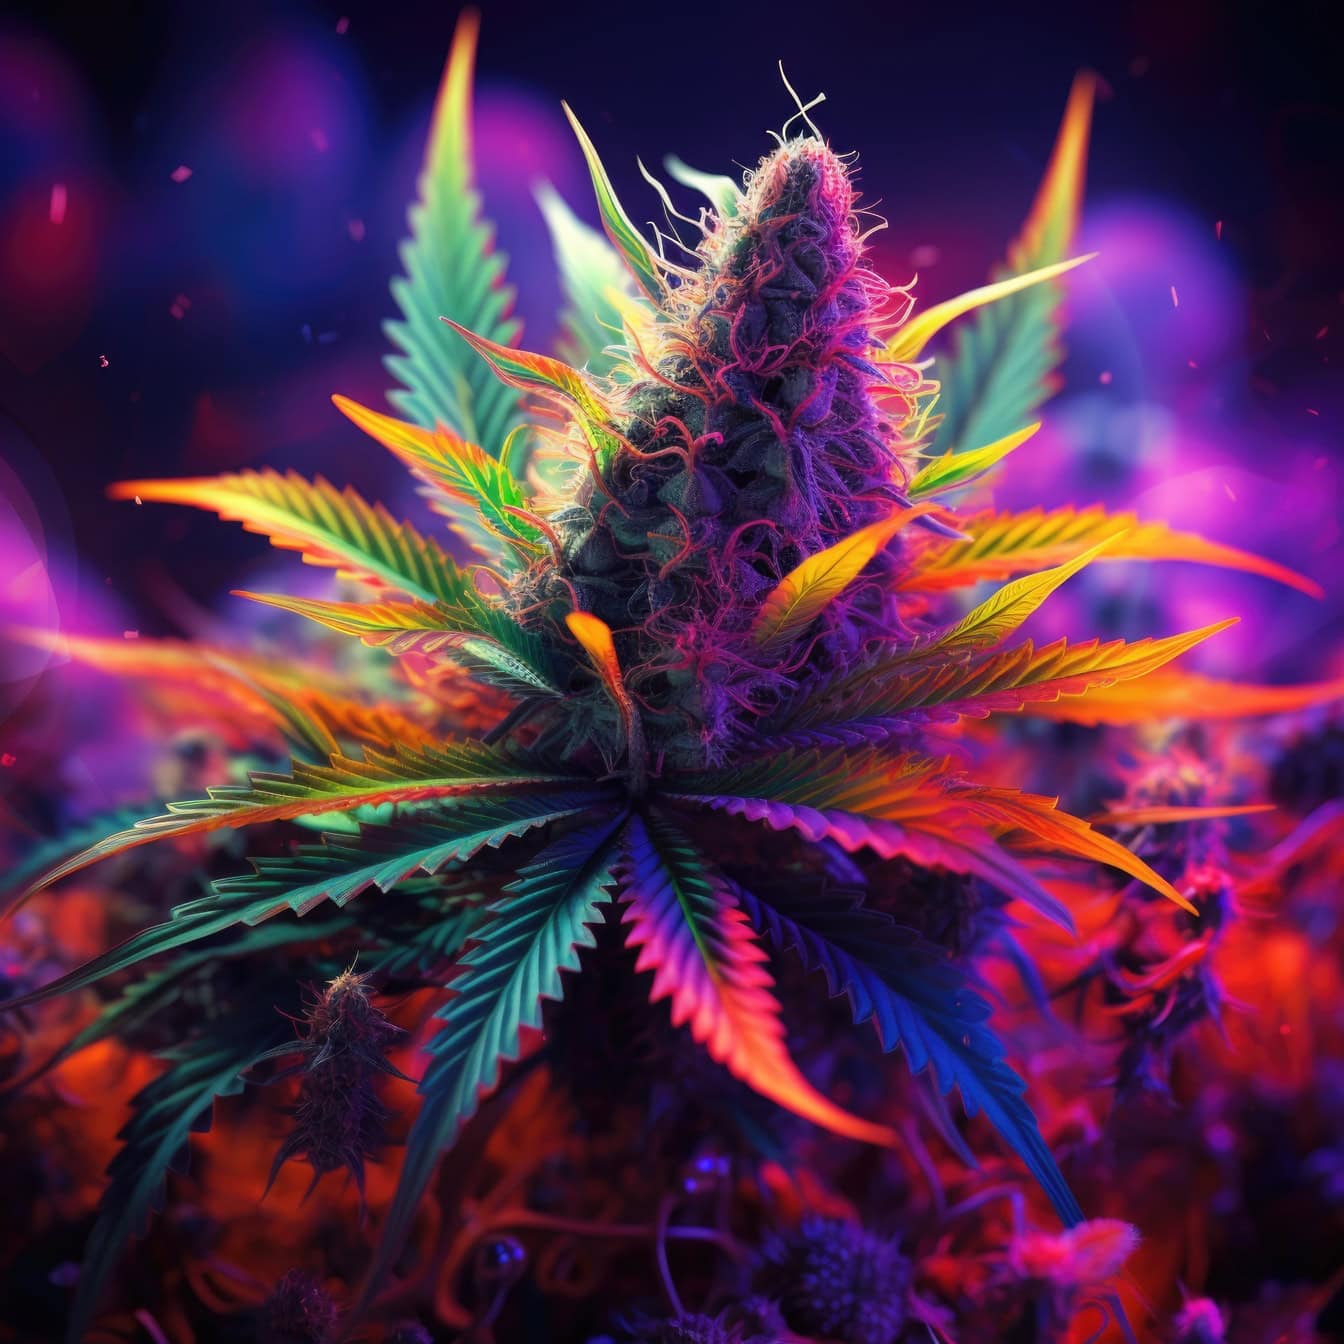 A vibrant graphic of a cannabis herb in psychedelic pop art style